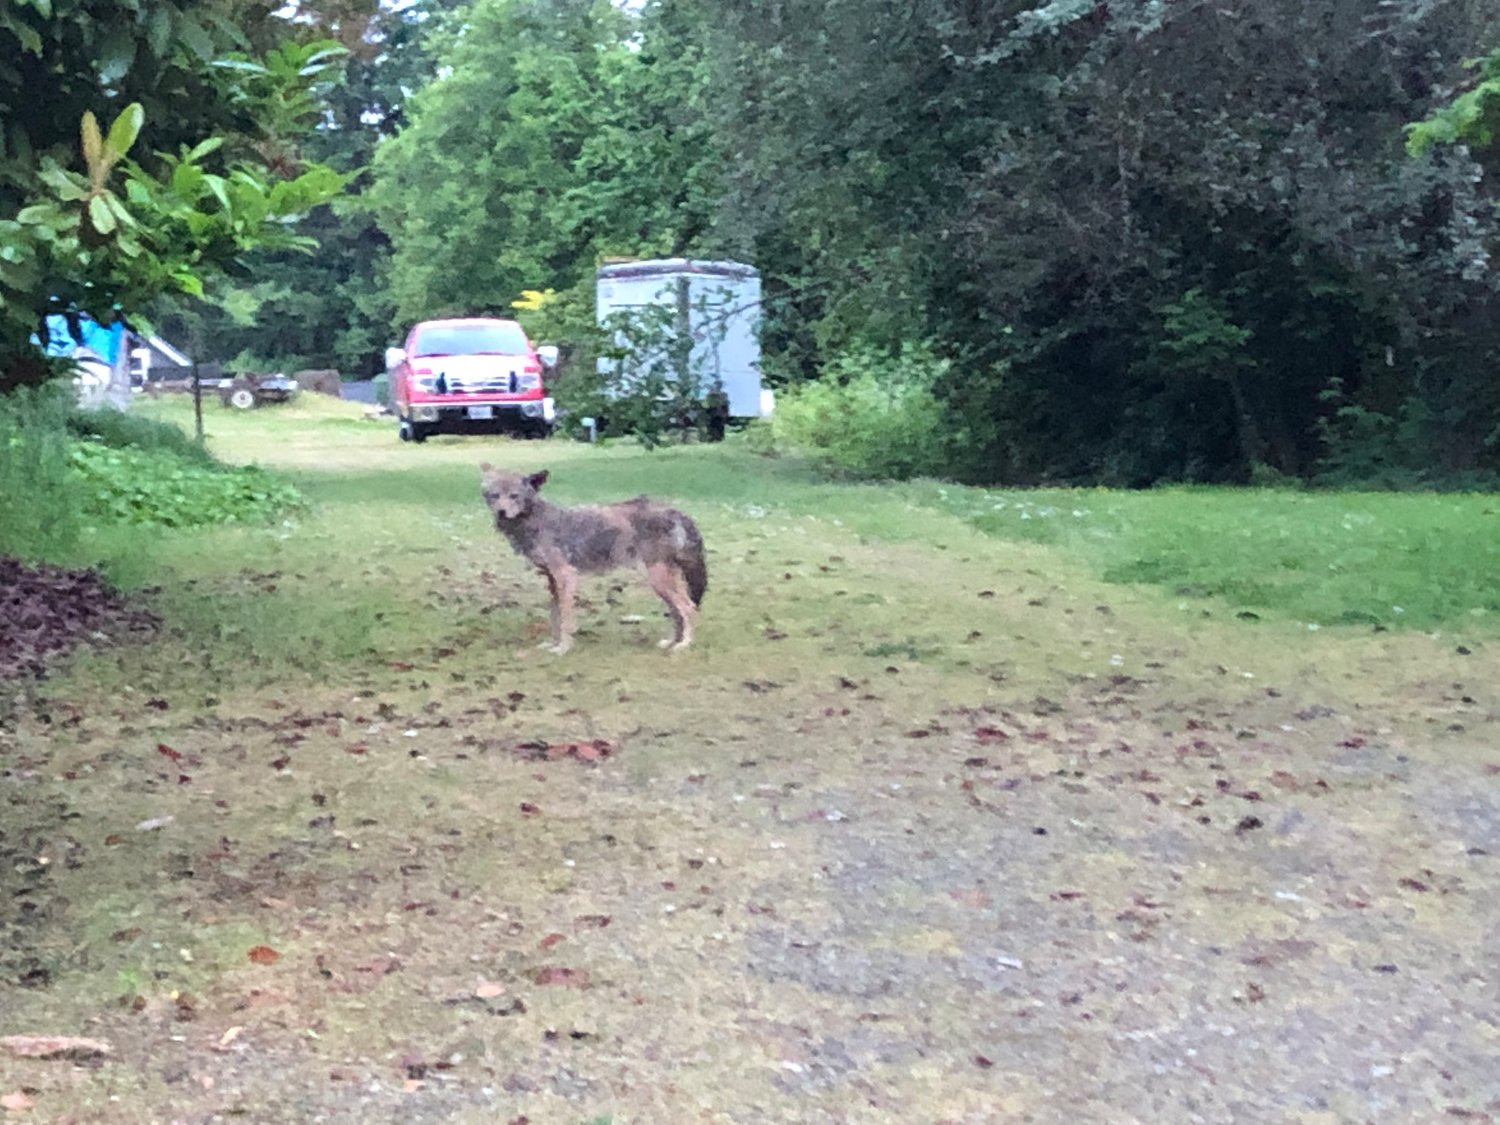 Apparently unafraid of a driver in a car, this coyote, was photographed from a distance of approximately 30 feet on June 15, 2022 in Olympia's Eastside neighborhood.